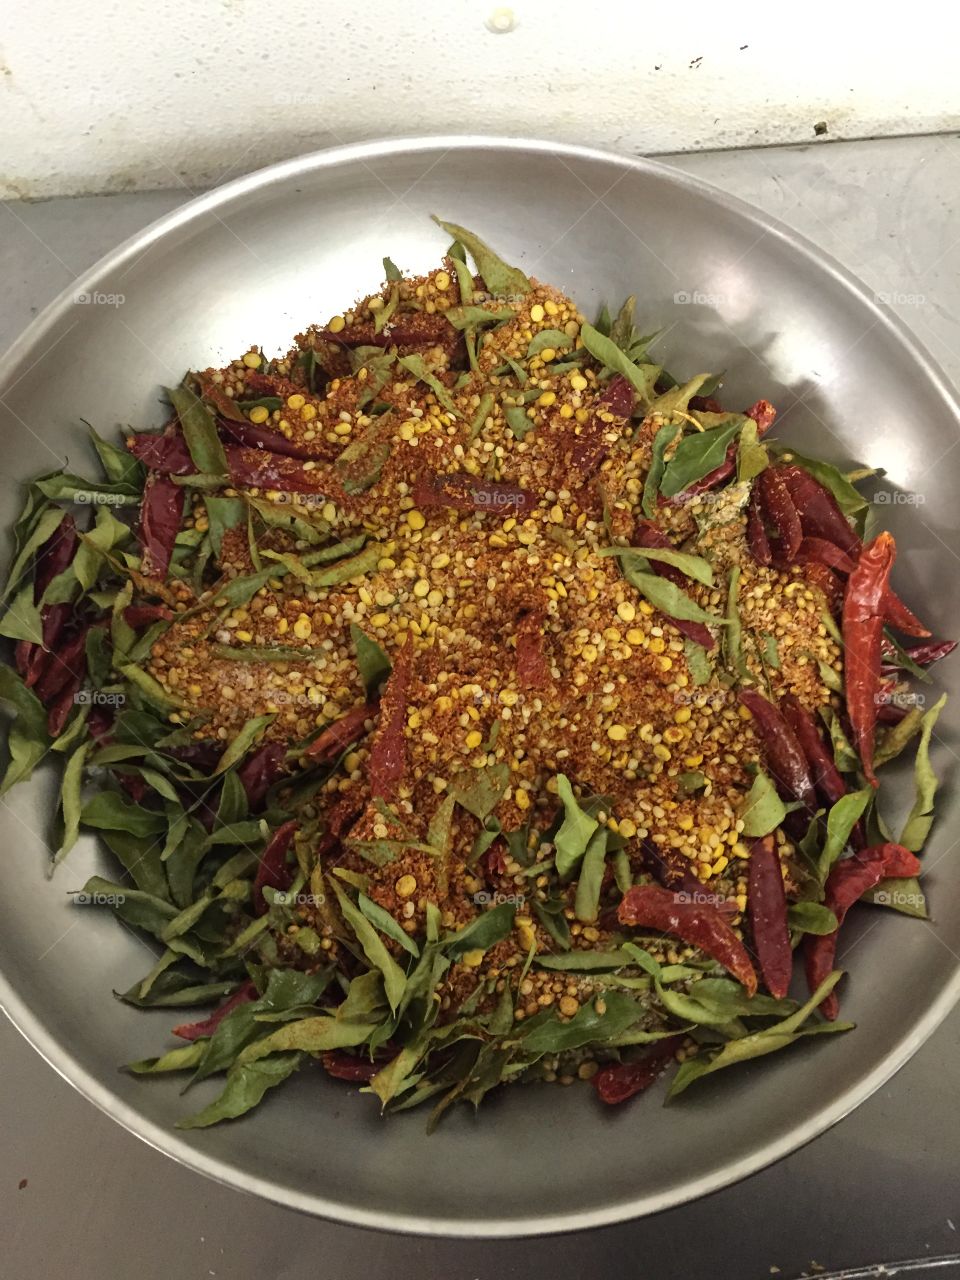 Curry leaves, lentils, and chilli peppers